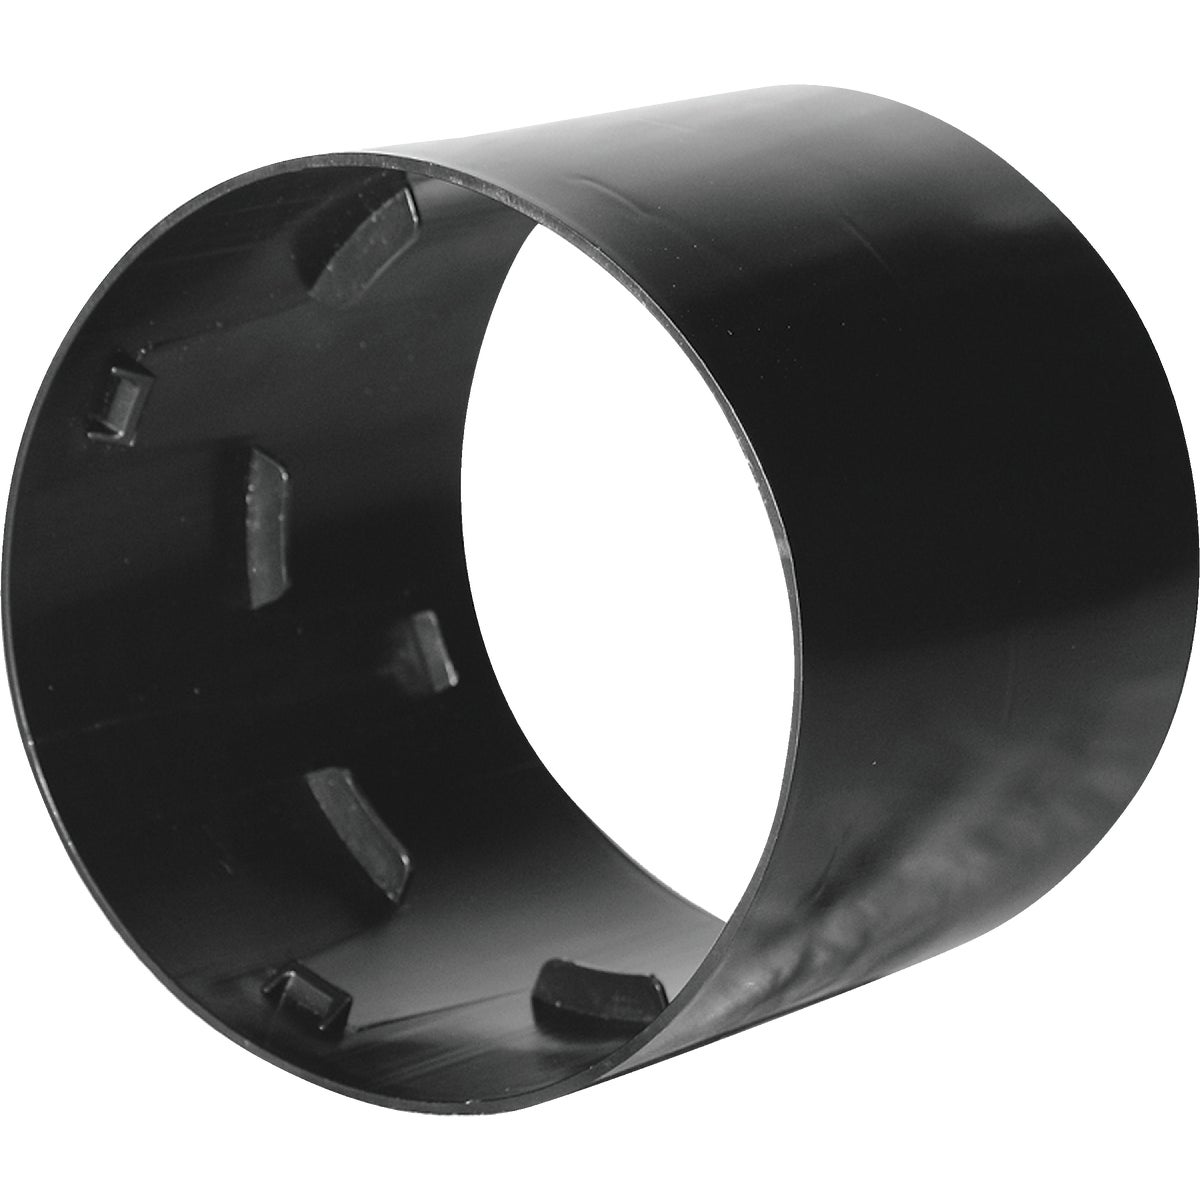 Item 405626, Corrugated fittings are made from strong lightweight polyethylene plastic